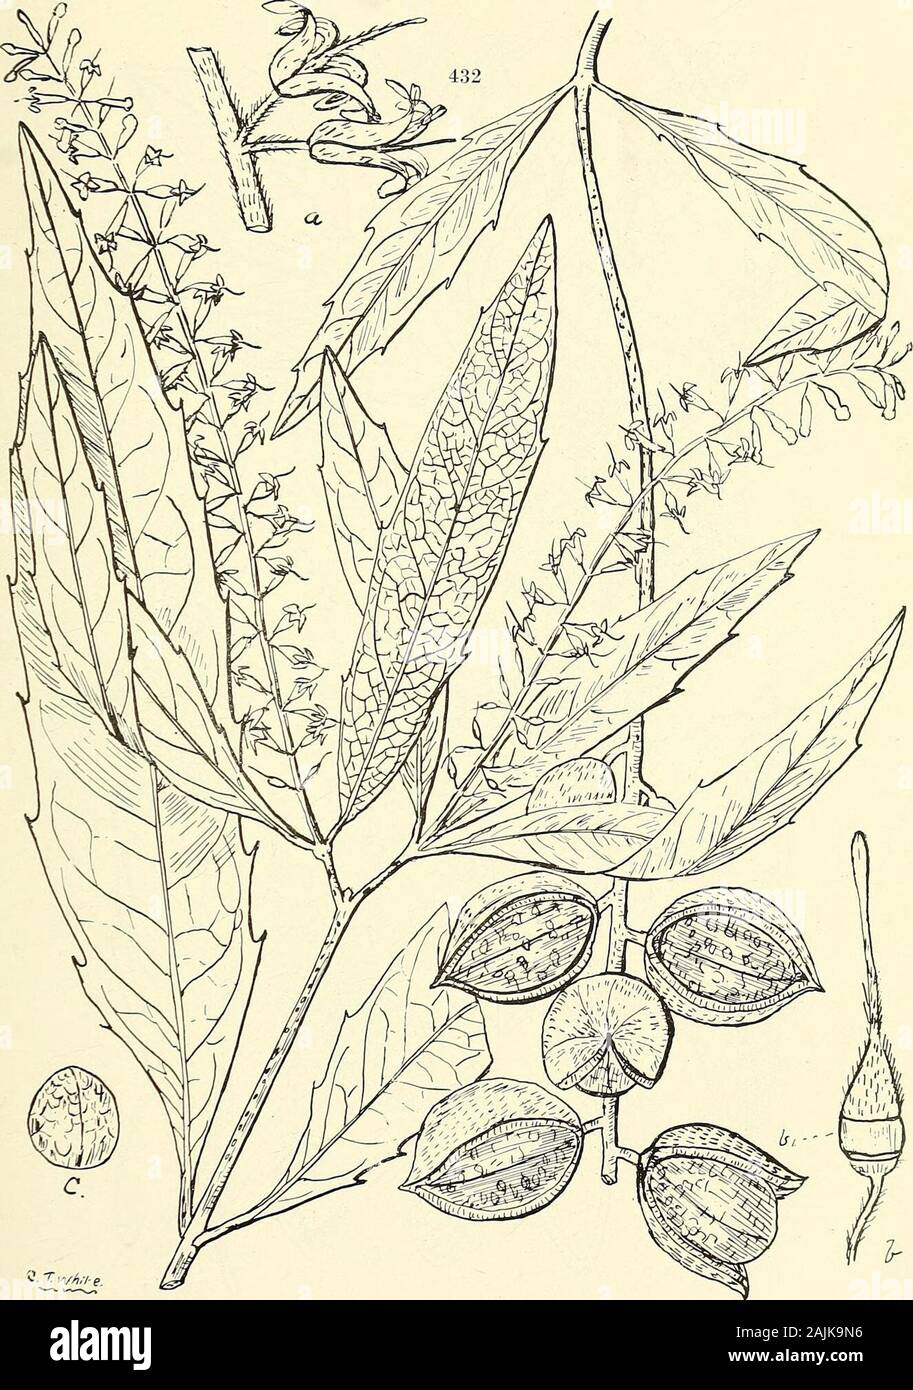 Comprehensive catalogue of Queensland plants, both indigenous and naturalised To which are added, where known, the aboriginal and other vernacular names; with numerous illustrations, and copious notes on the properties, features, &c., of the plants . CT-W^re. 430 and 431. Forms of Macadamia ternifolia, F. v. M. CXI. PROTEACE^. 4i:. 432. Macadamia Lowii, Bail. (a) Two flowers on the rhachis, (b) pistil, (bi) hypogynous glands united in a ring,(c) a nut, showing putamen. 446 CXI. PROTEACE^E. Stock Photo